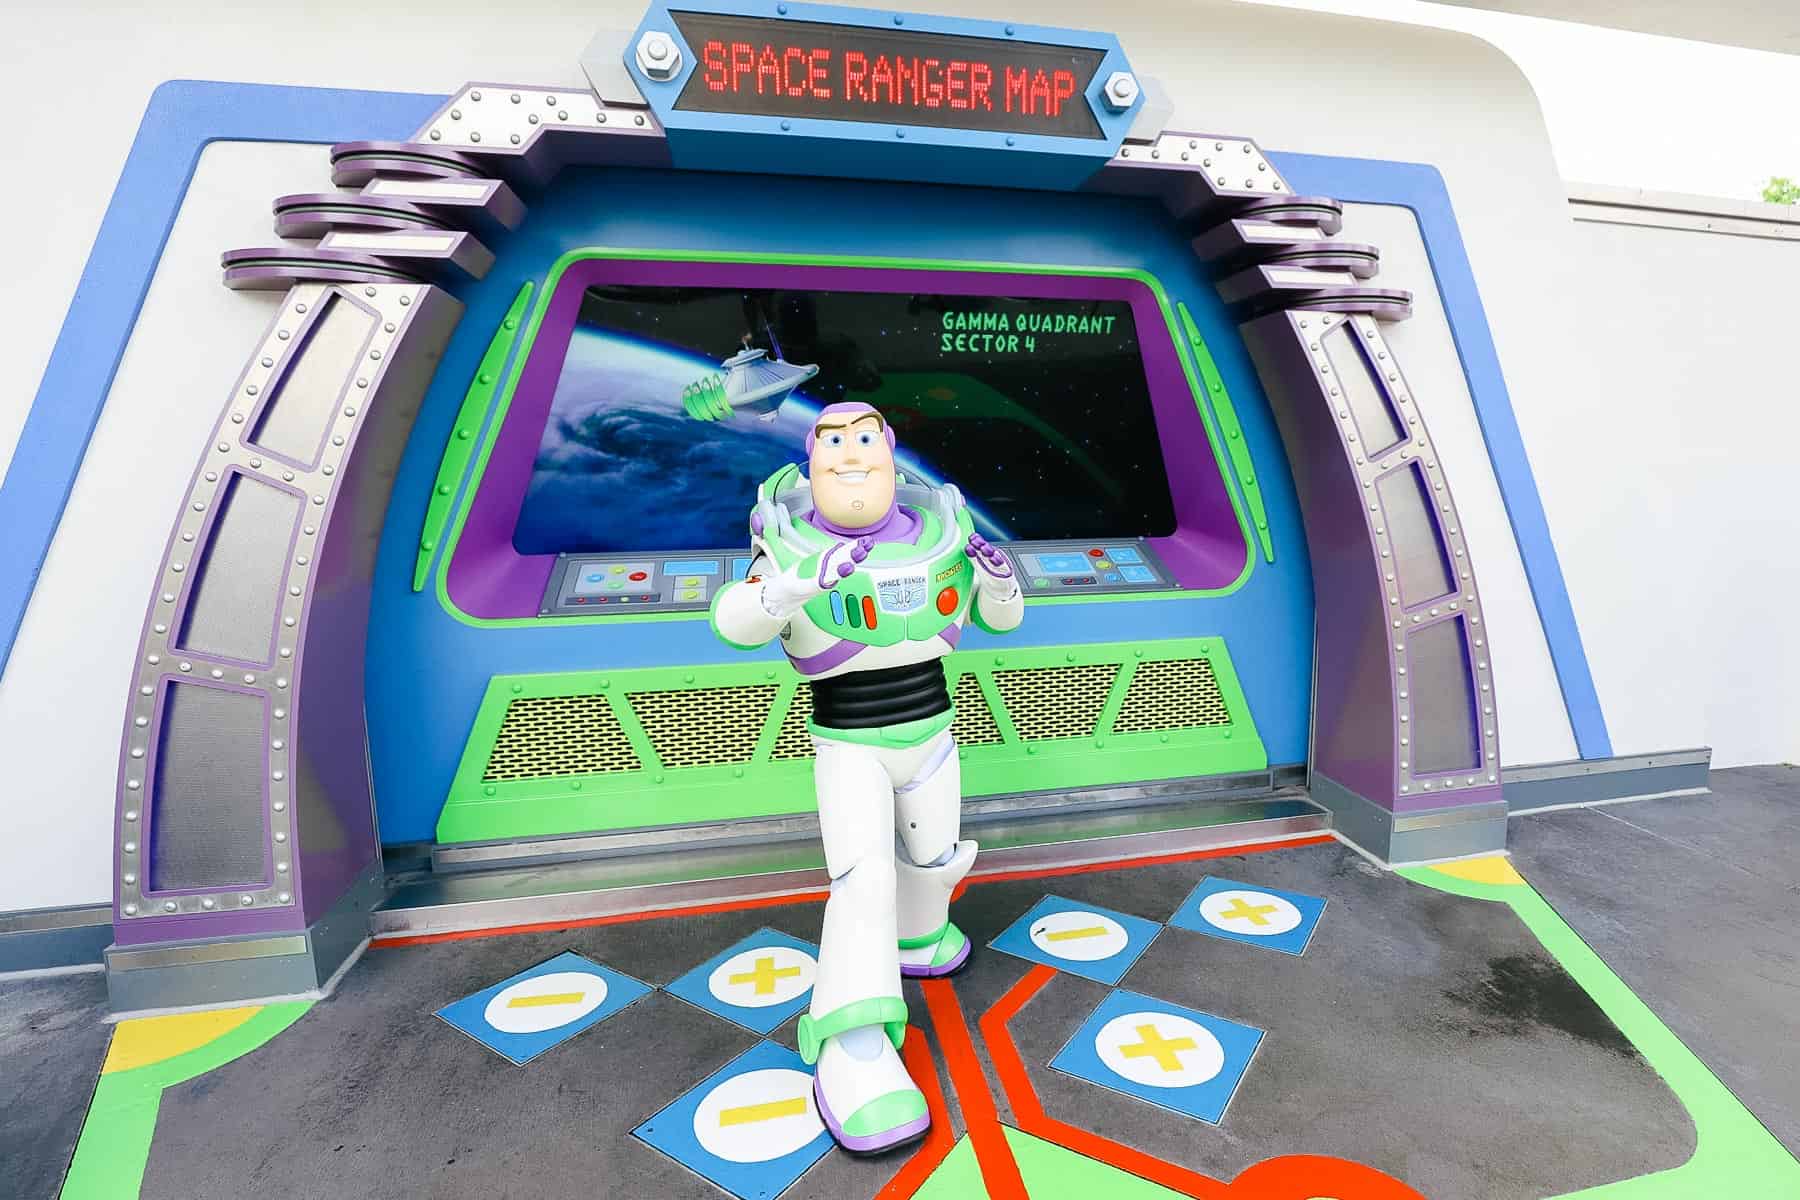 Buzz Lightyear at his former meet-and-greet in Tomorrowland at Magic Kingdom. 